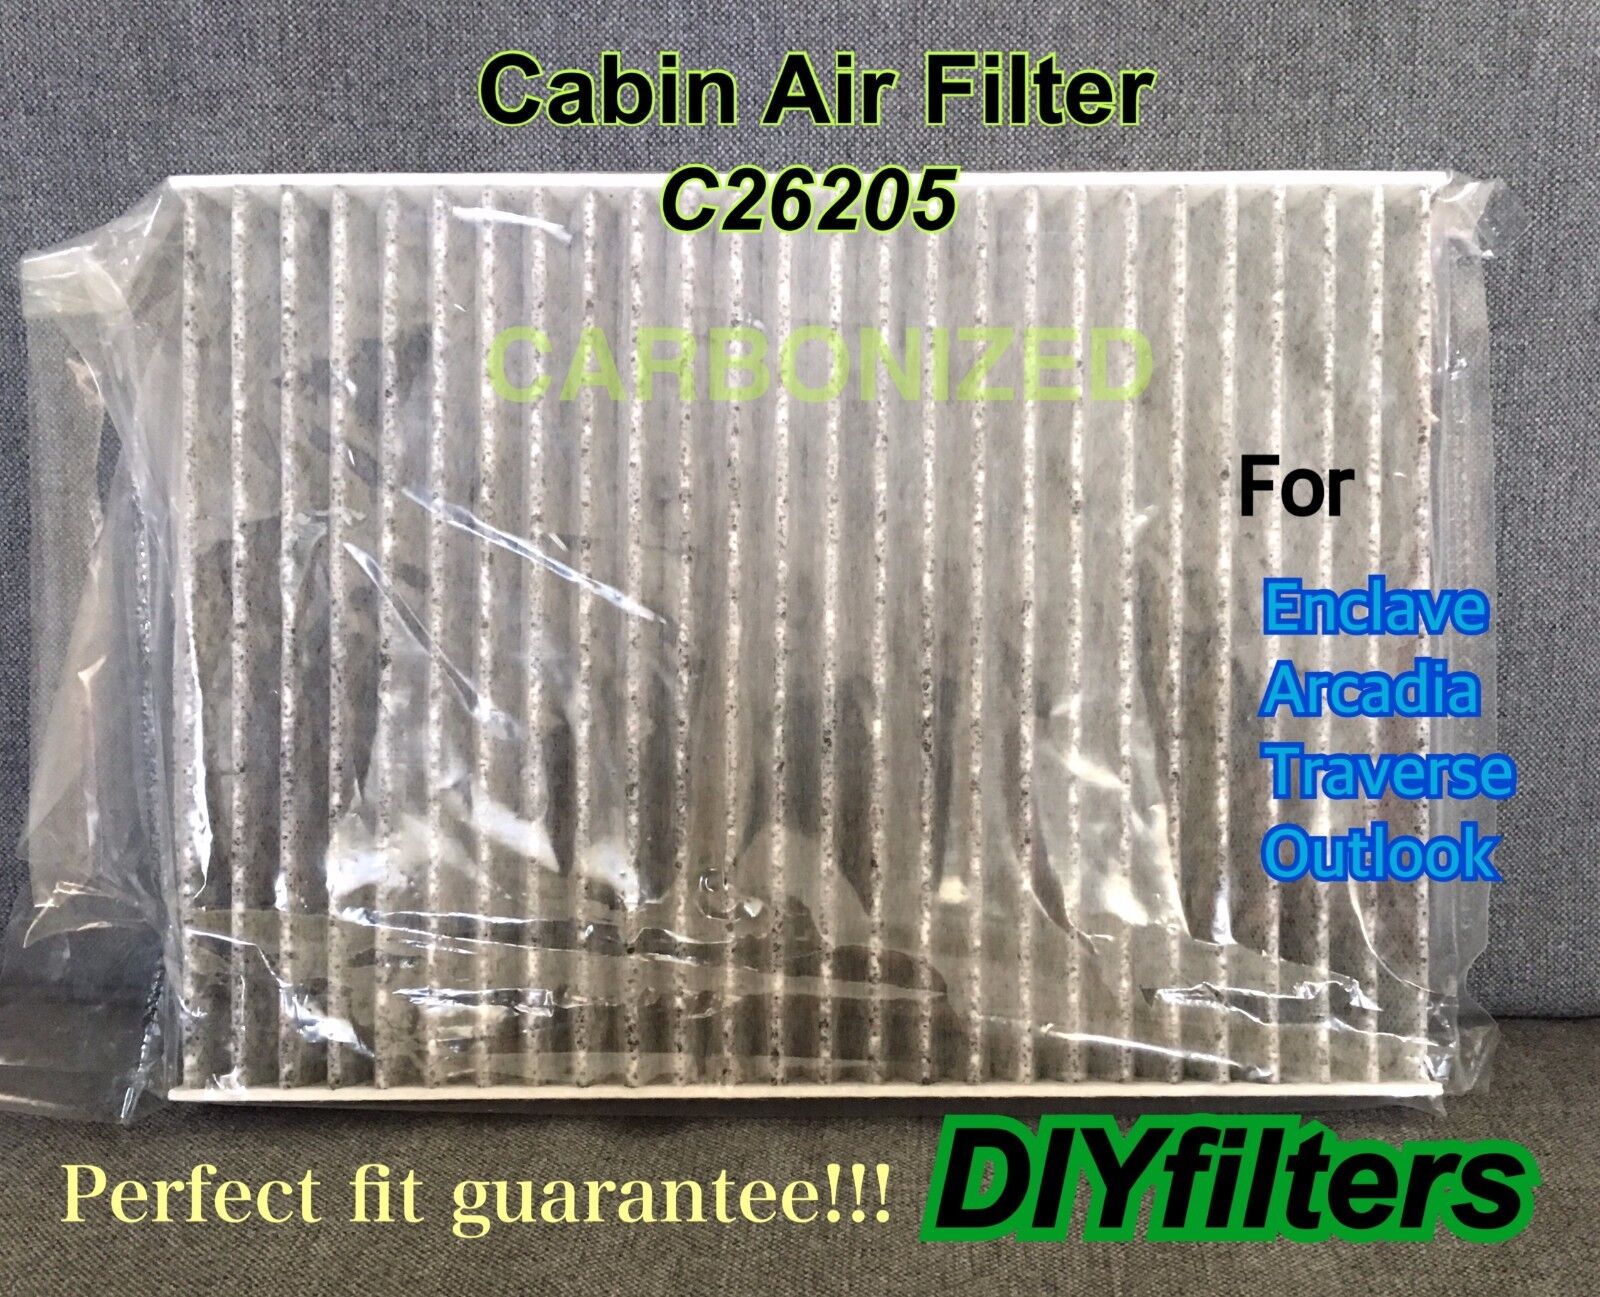 C26205 CARBON CABIN AIR FILTER for 07-16 Acadia 08-17 Enclave Traverse Outlook